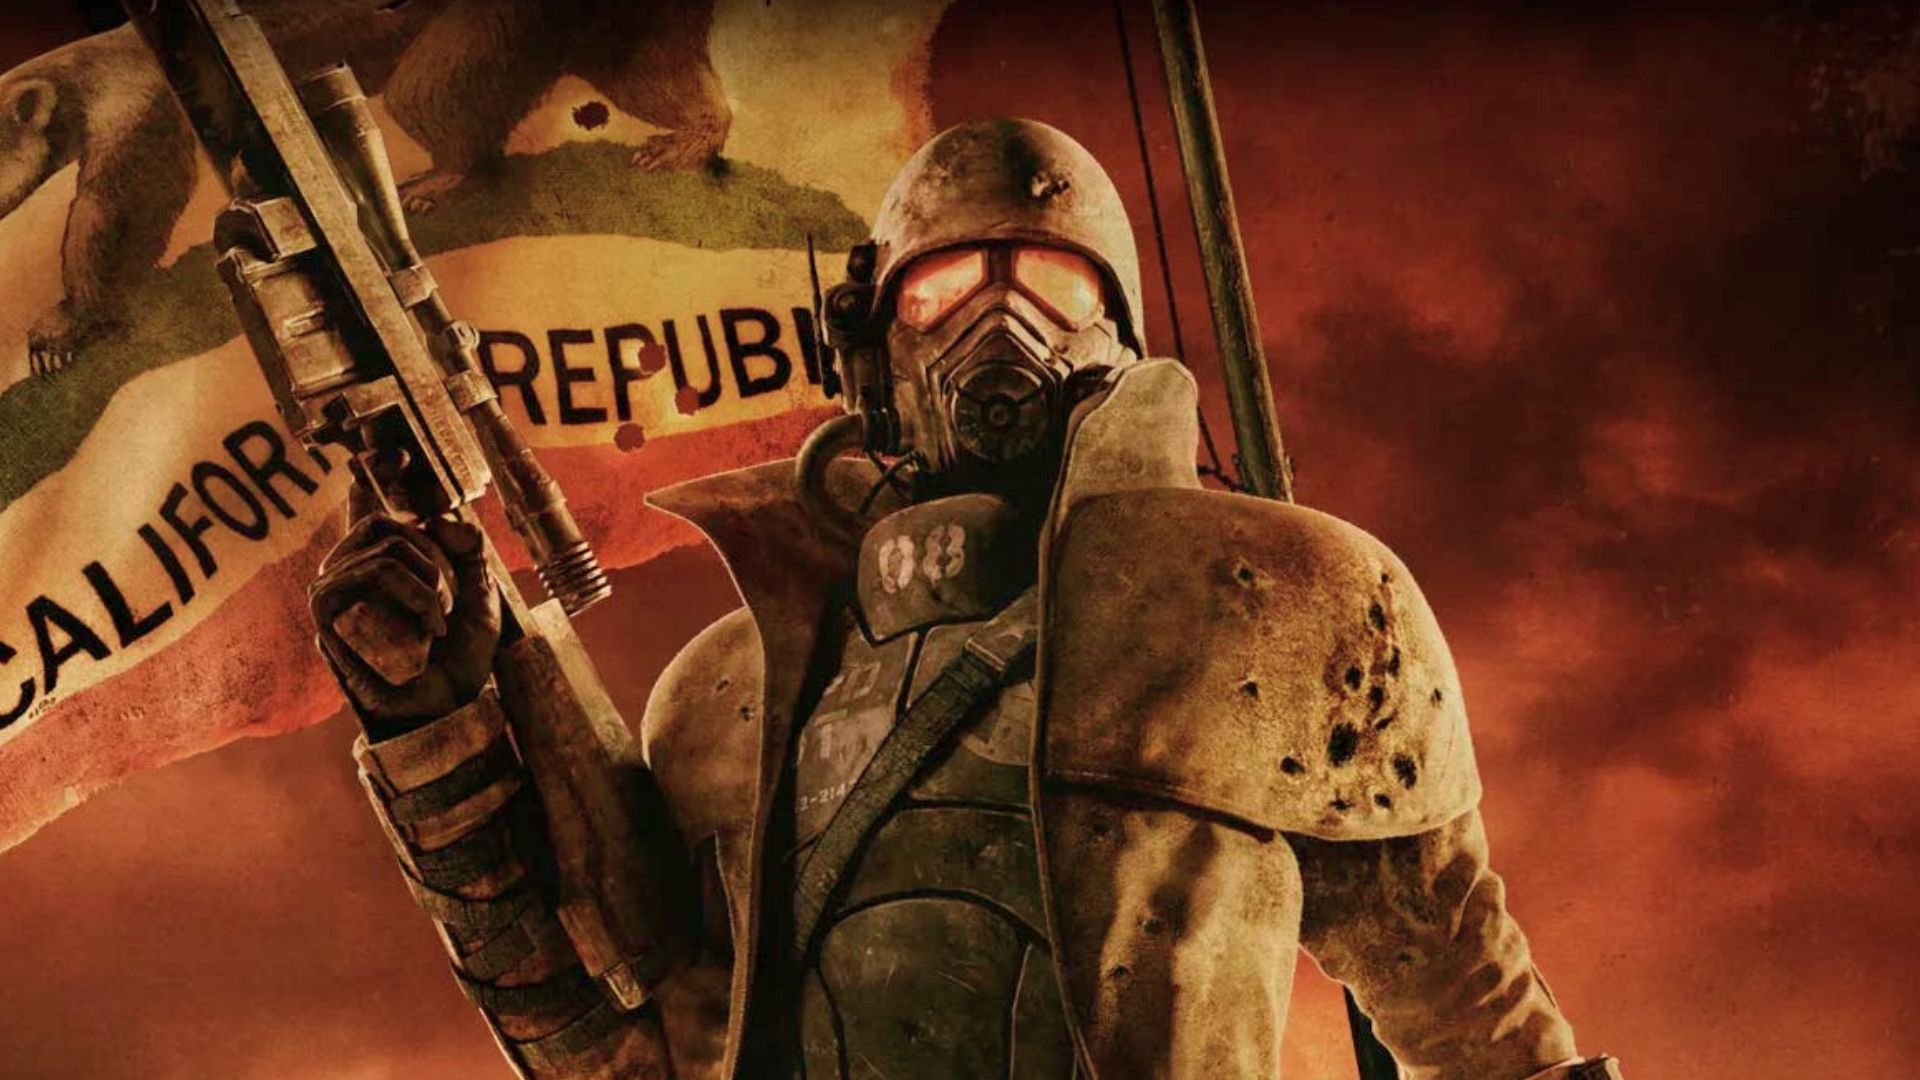 Frontier Mod for 'Fallout: New Vegas' Is Finally Available